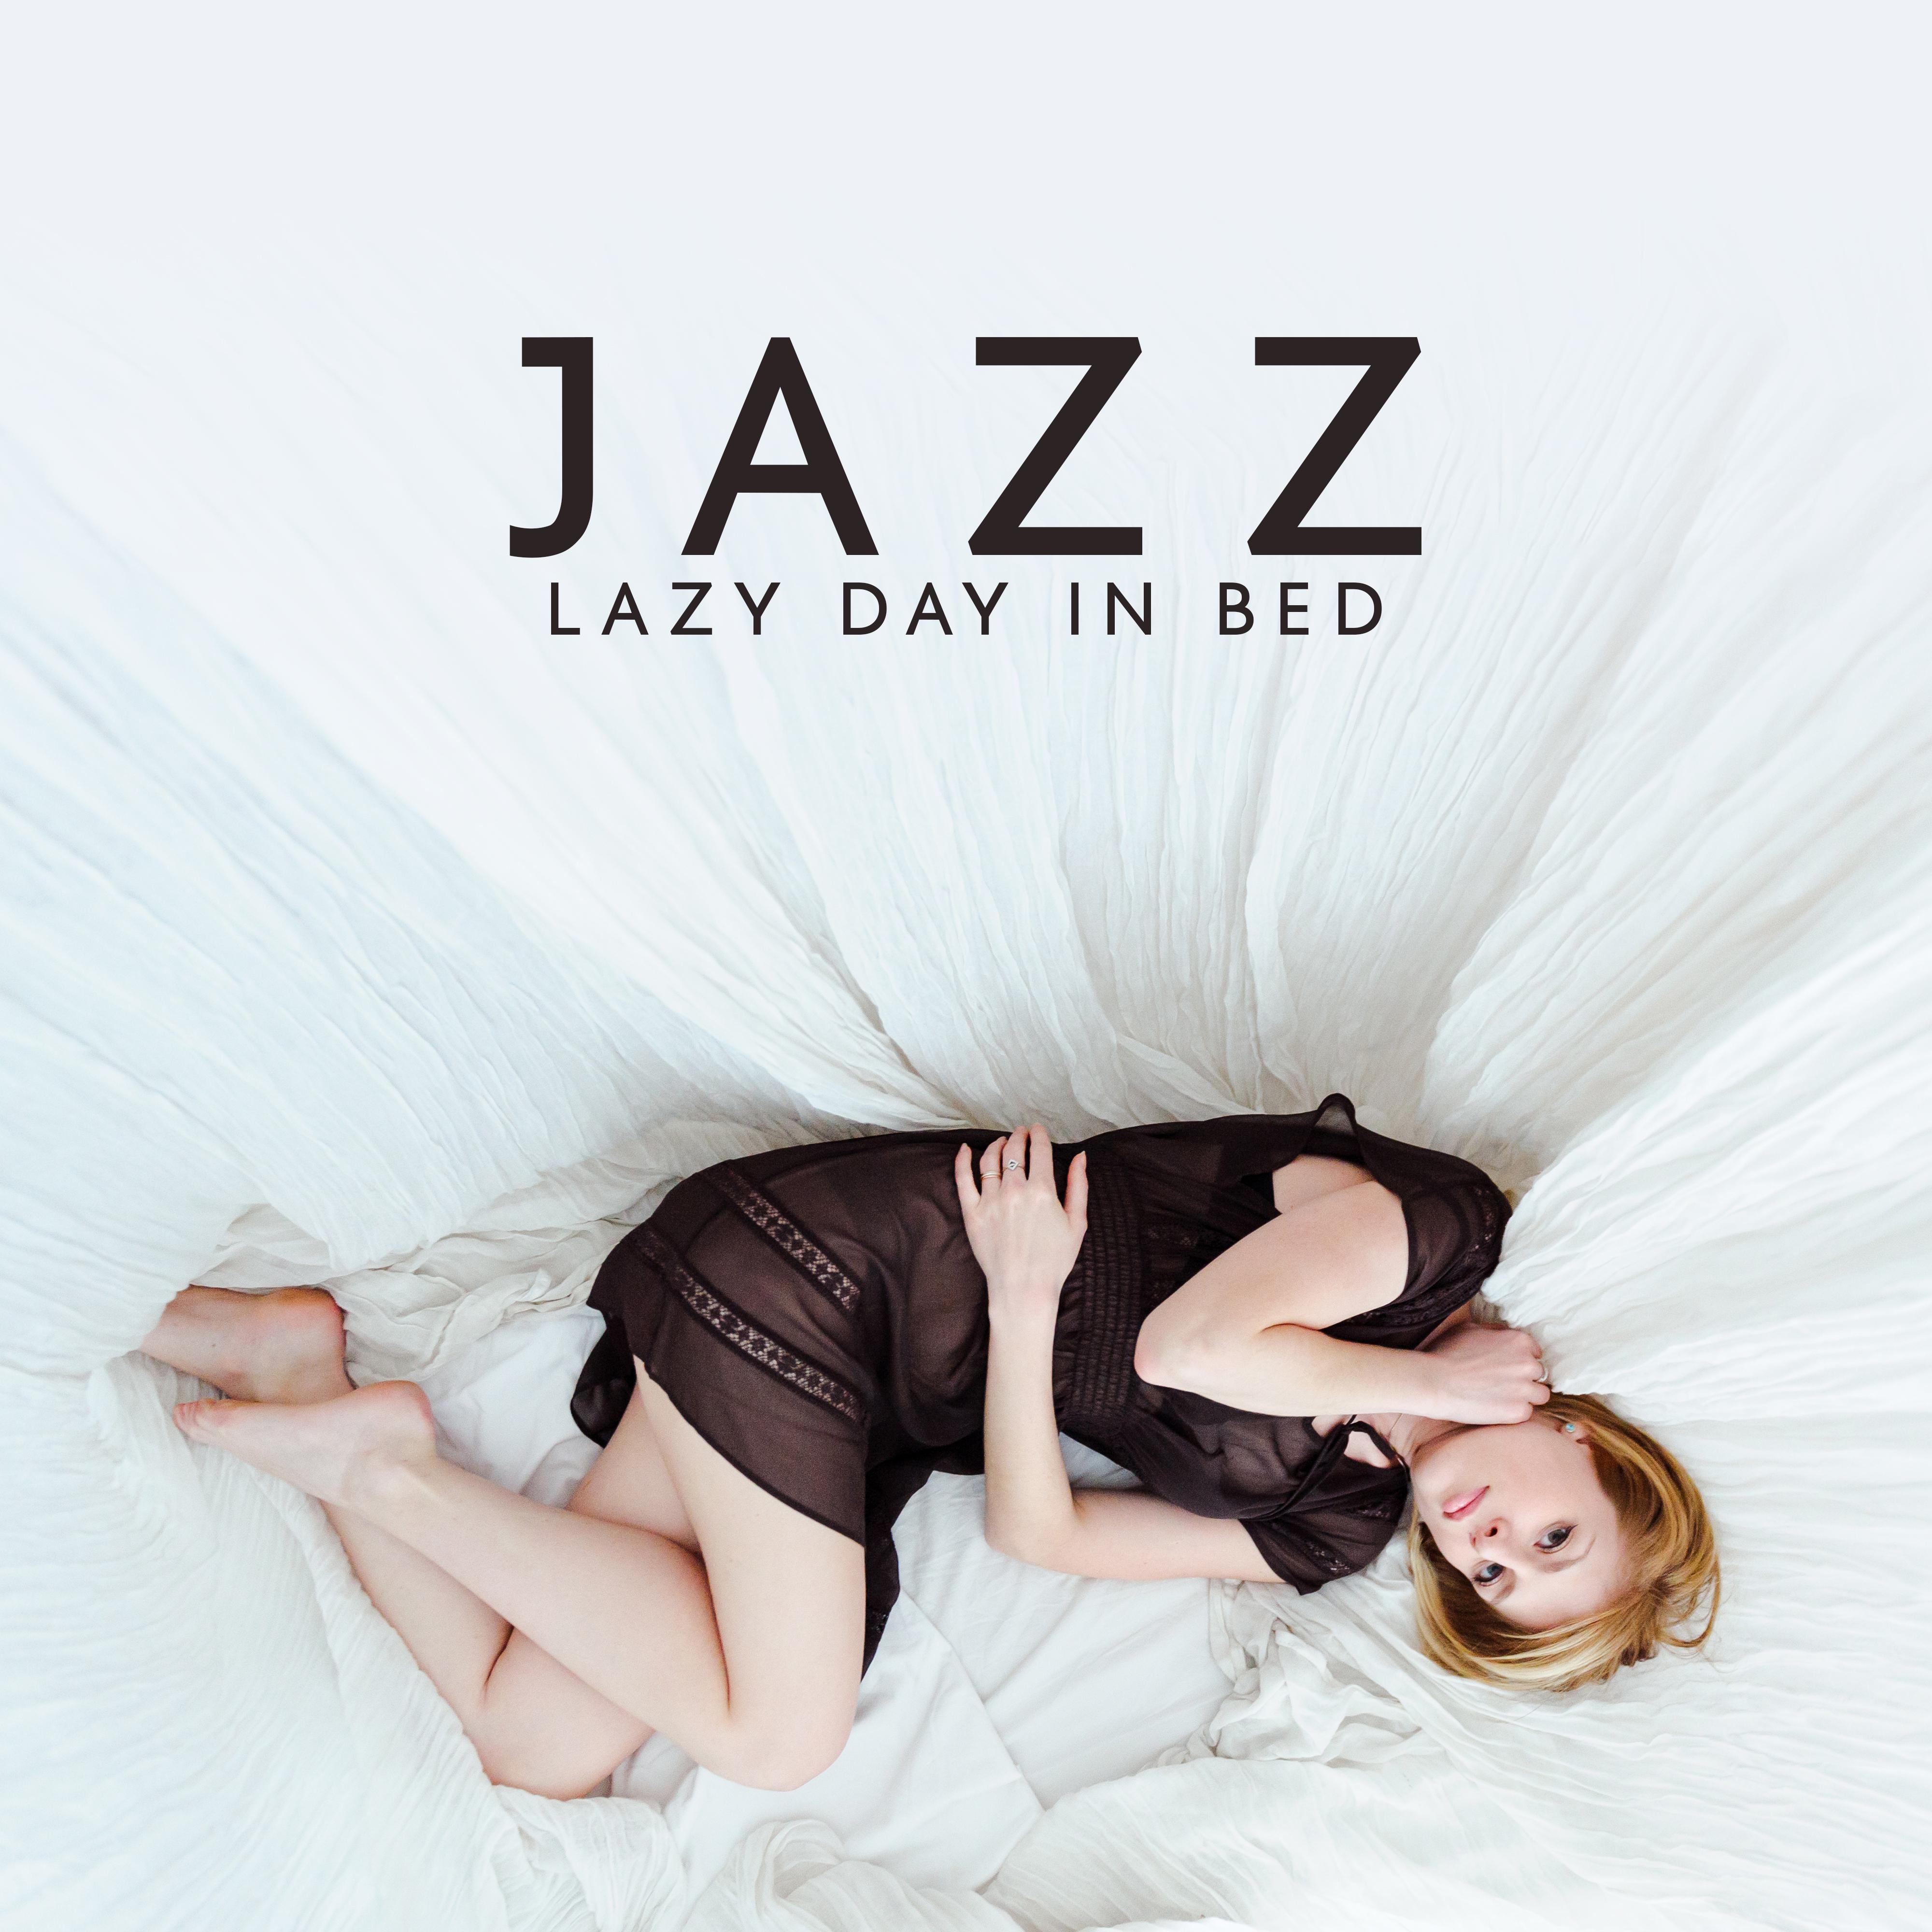 Jazz Lazy Day in Bed  Instrumental Smooth Jazz Music Compilation for a Good Day at Home